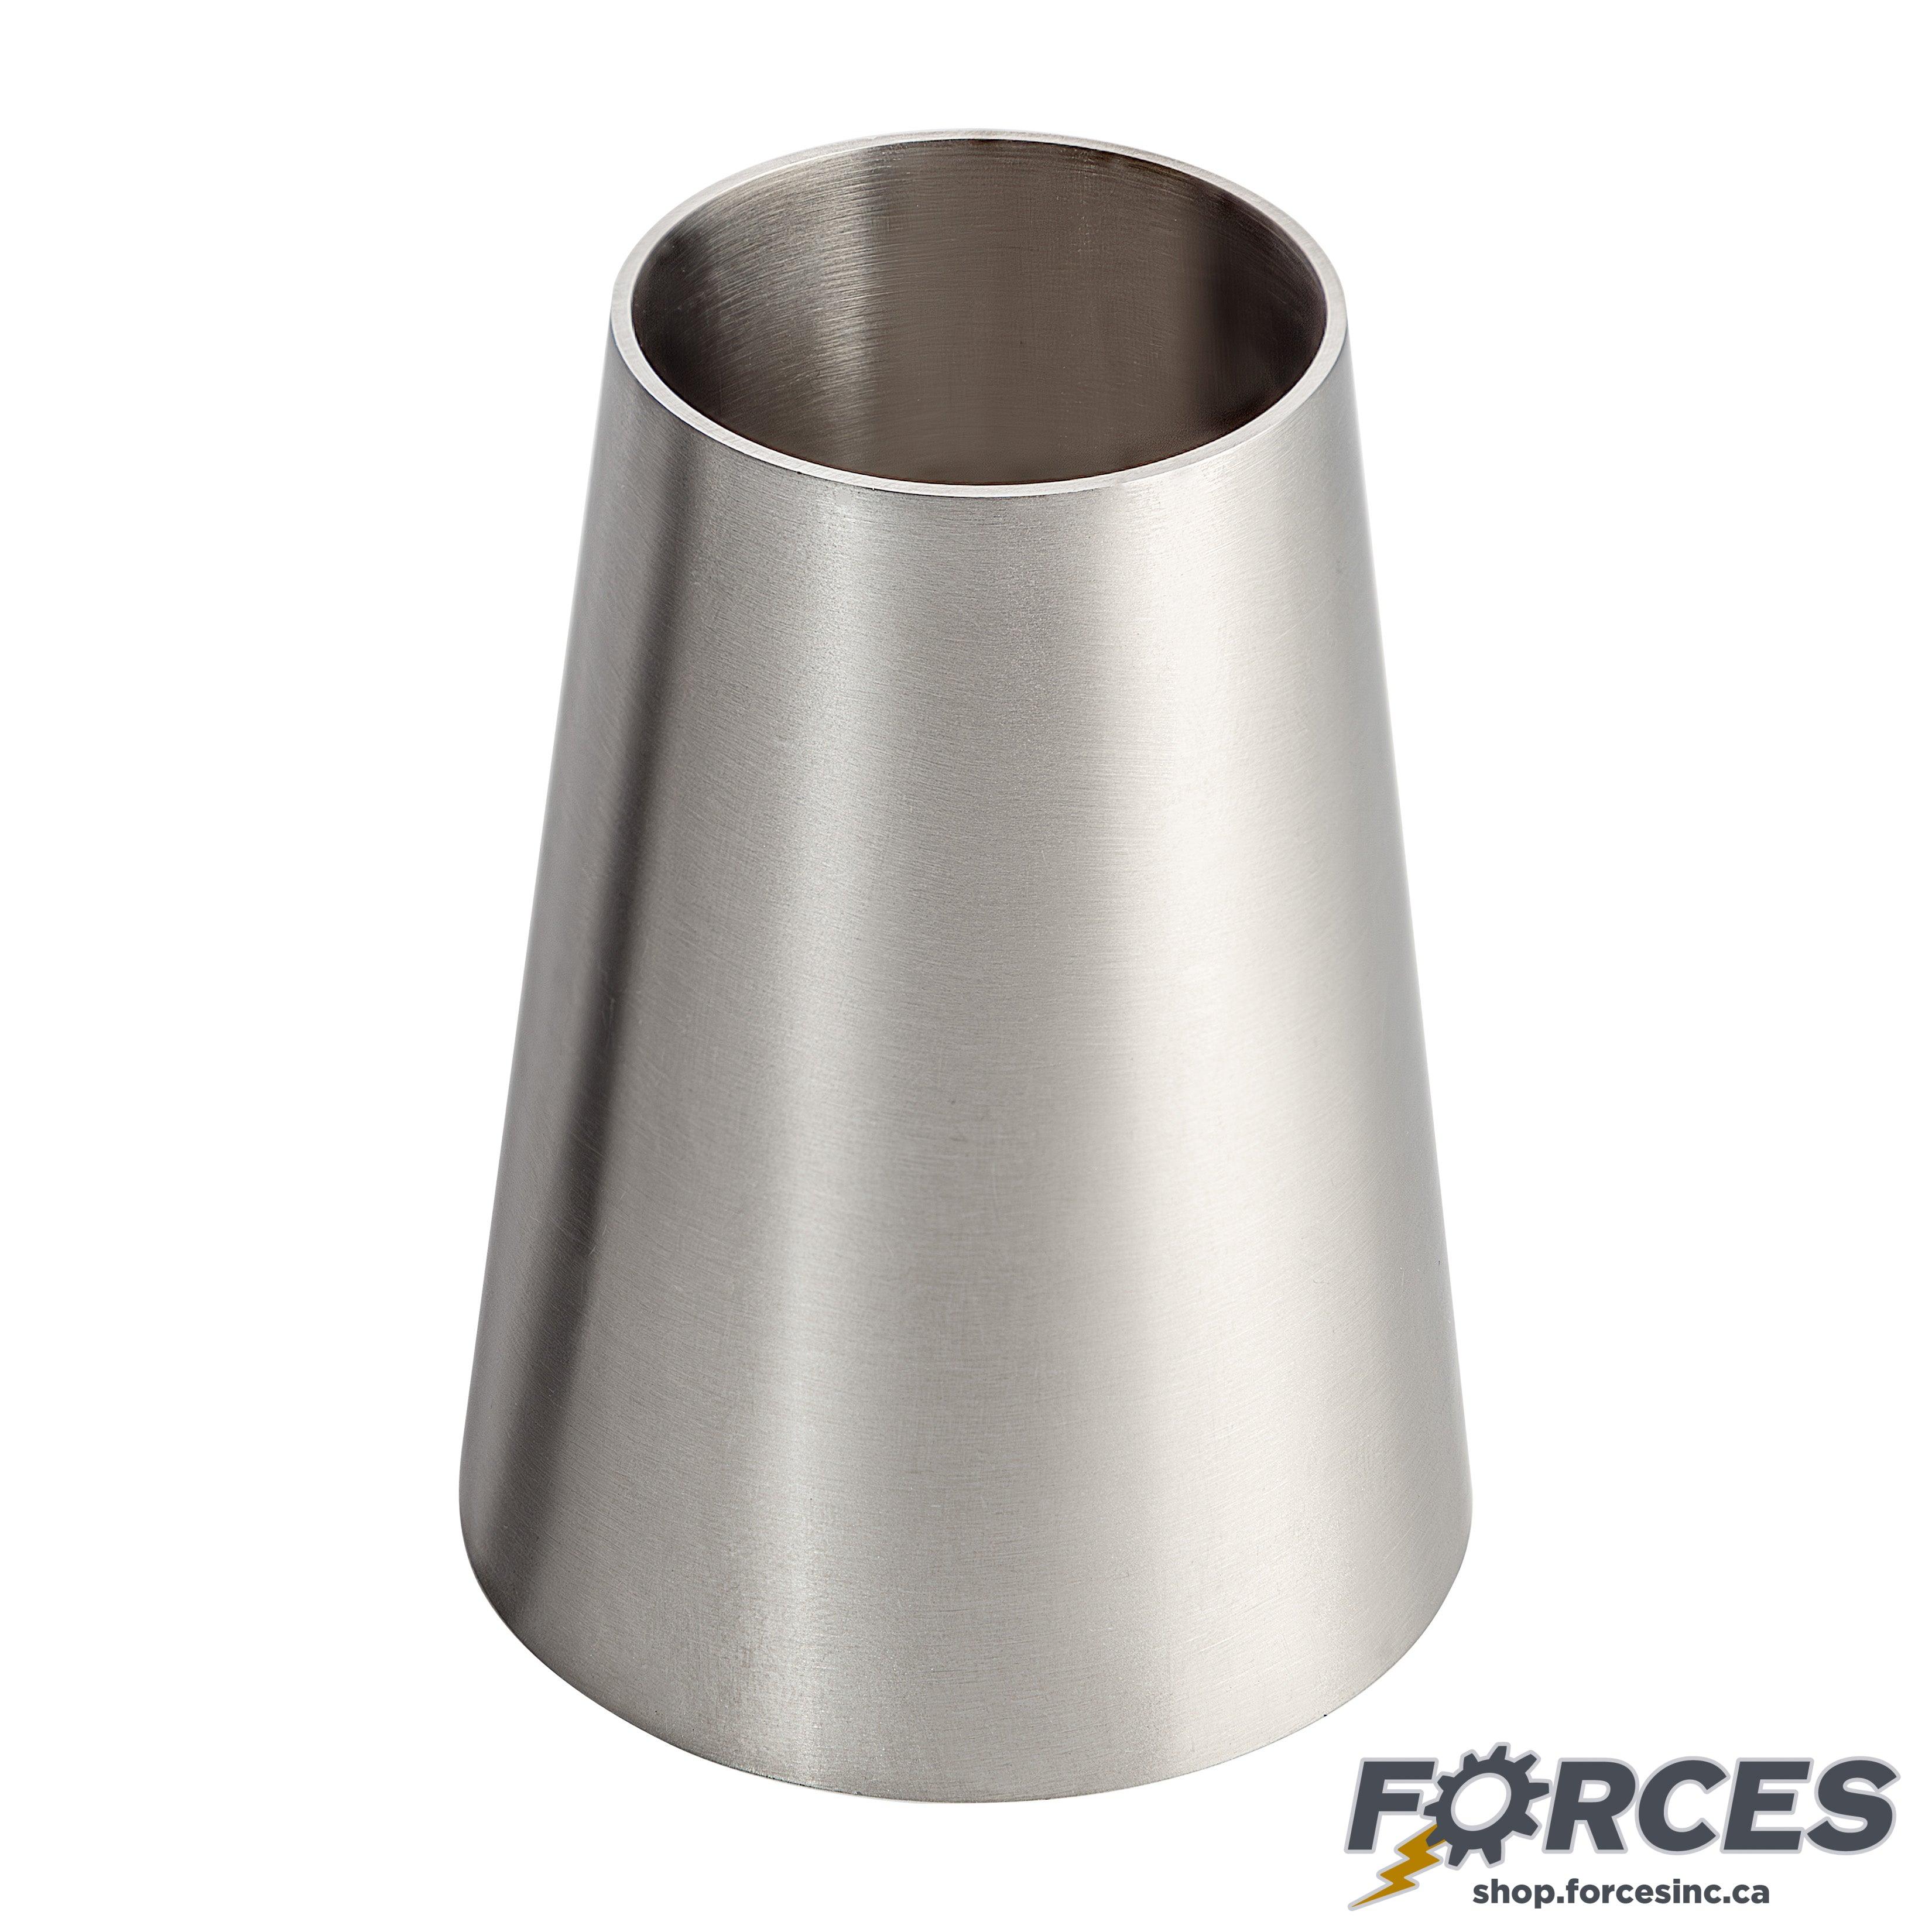 4" x 1/2" x 9" Long Butt Weld Concentric Reducer - Stainless Steel 316 - Forces Inc